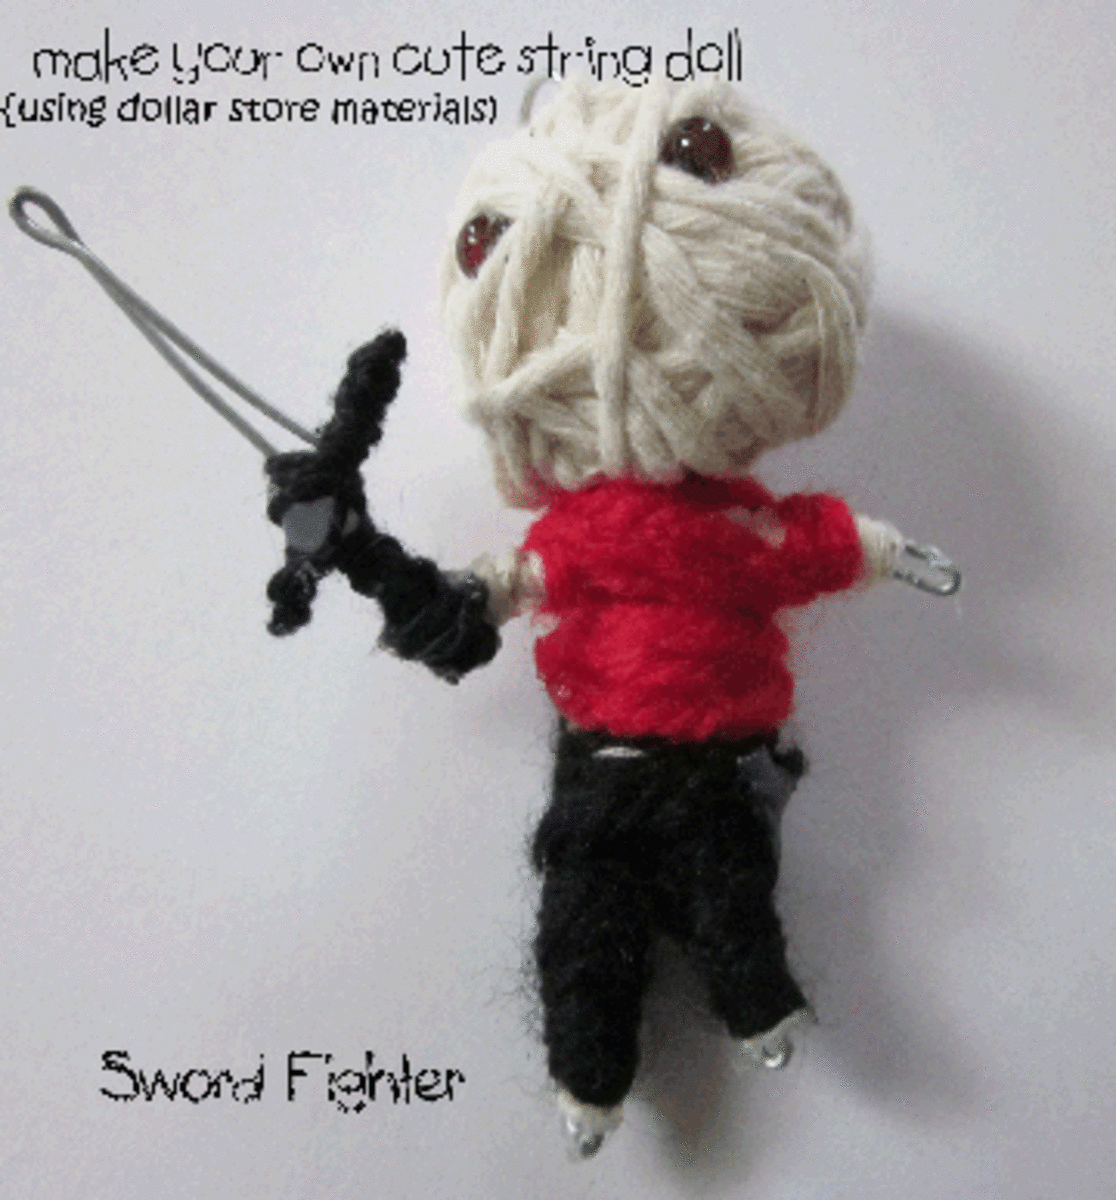 String Doll Idea #3 Sword Fighter: Use colored string and add an extra sword with wire.  Use glue gun.